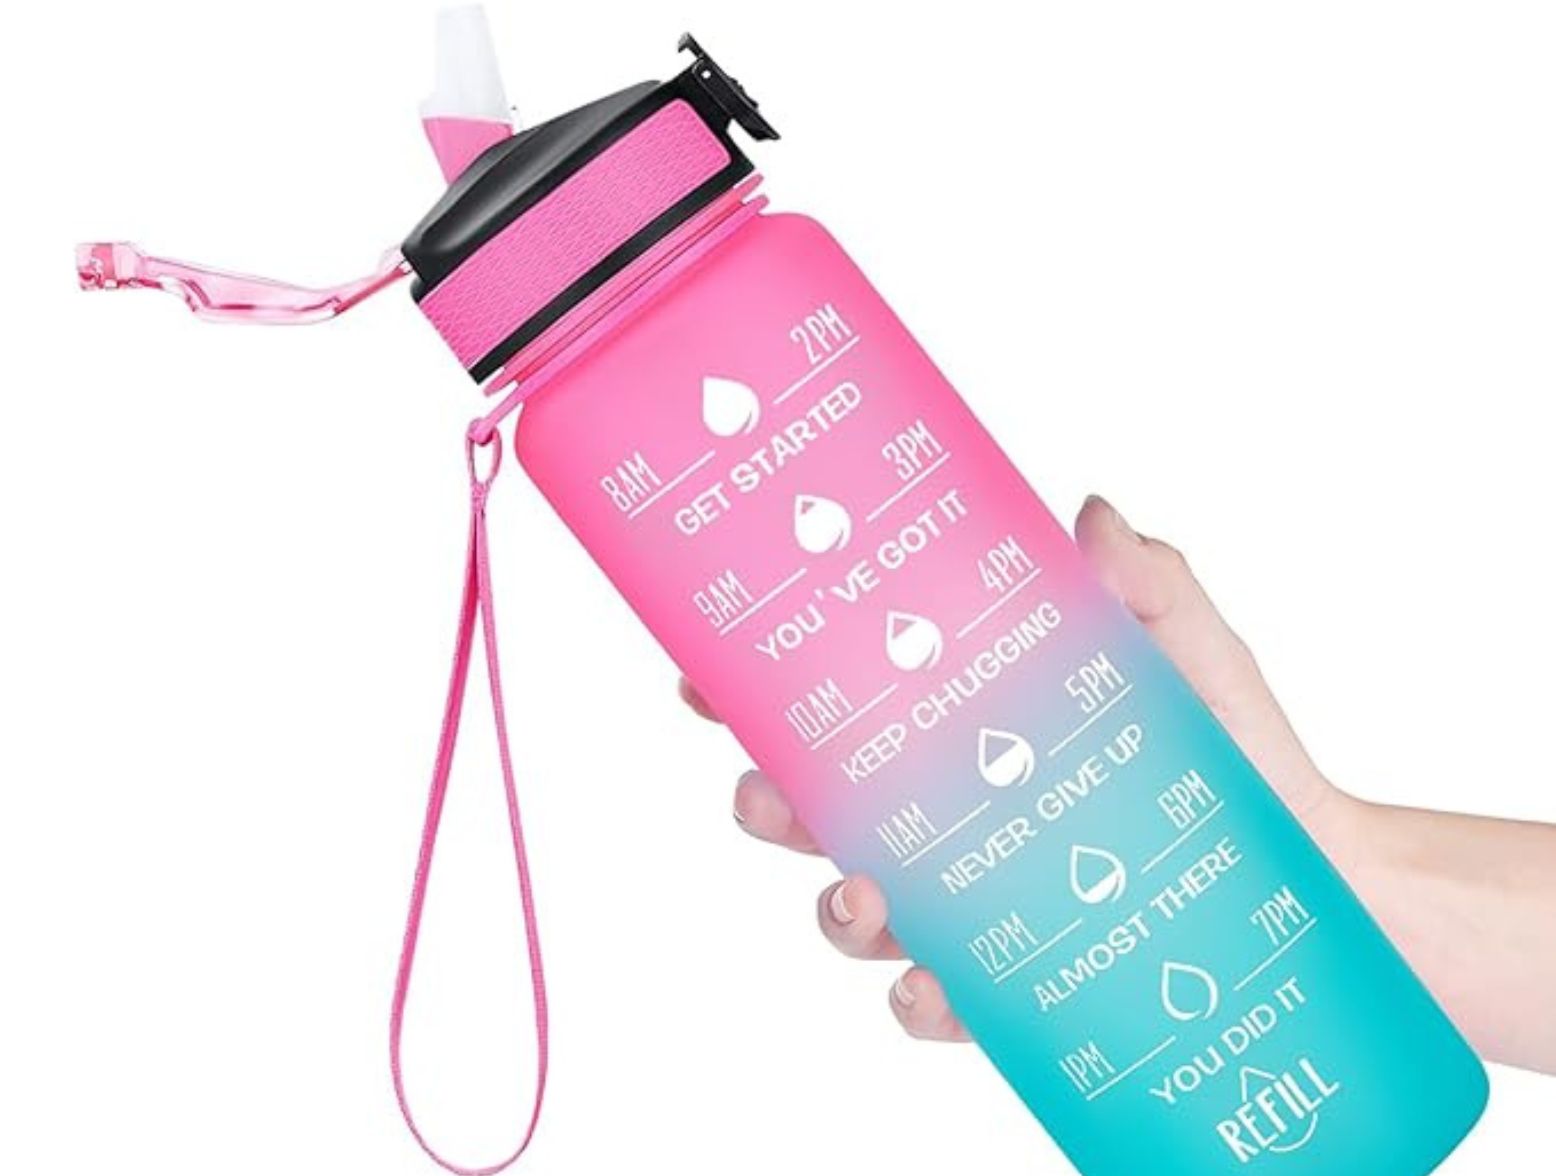 https://kiss951.com/wp-content/uploads/sites/48/2023/12/6-Tumblers-and-Water-Bottles-for-Hydration-Goals-in-2024-Photo-by-the-Hyeta-Store-from-Amazon.jpg?maxwidth=345&maxheight=259&anchor=middlecenter&quality=70&zoom=1.5